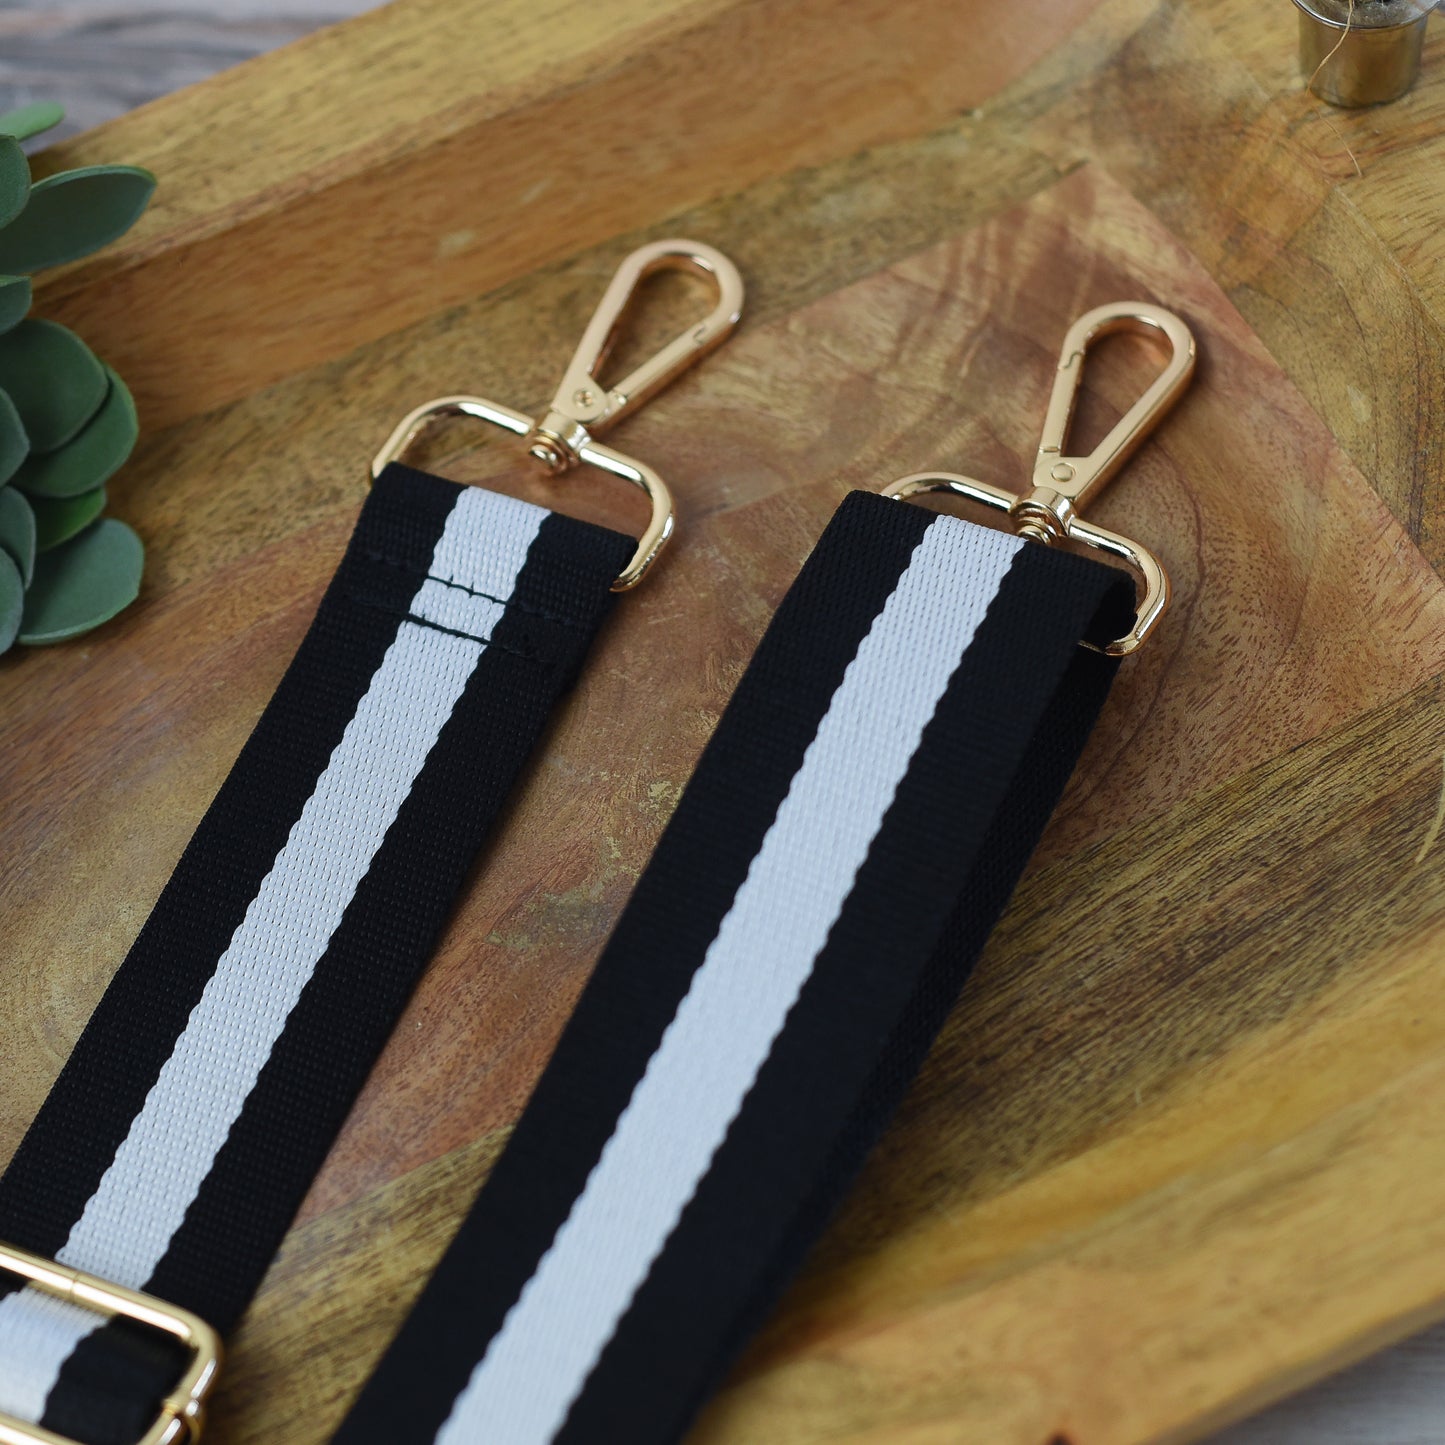 Adjustable Bag Strap 1.5 inch Striped- Black and White